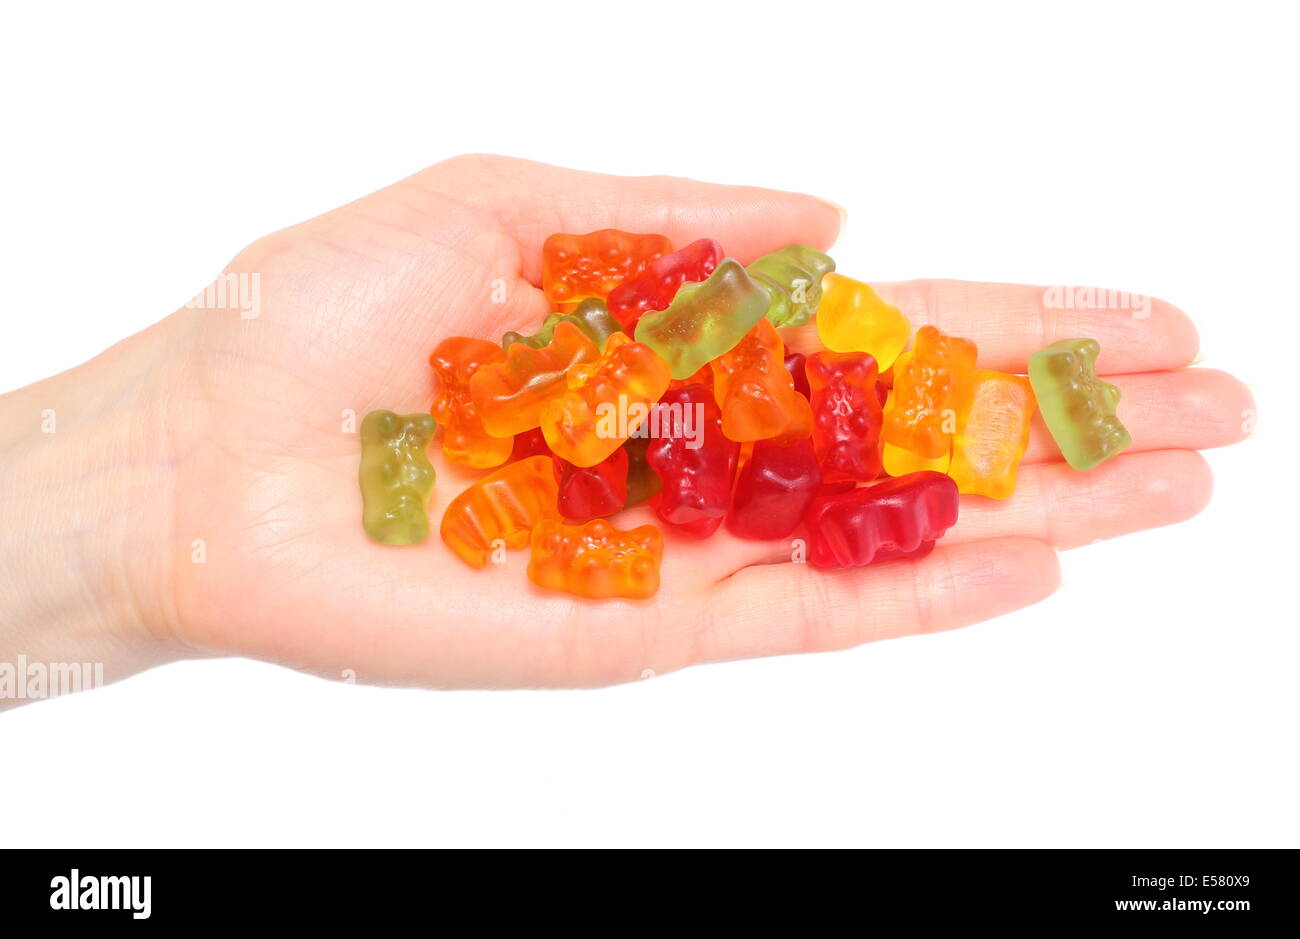 Lots of colorful haribo bear candies in hand of woman. Isolated on white background Stock Photo